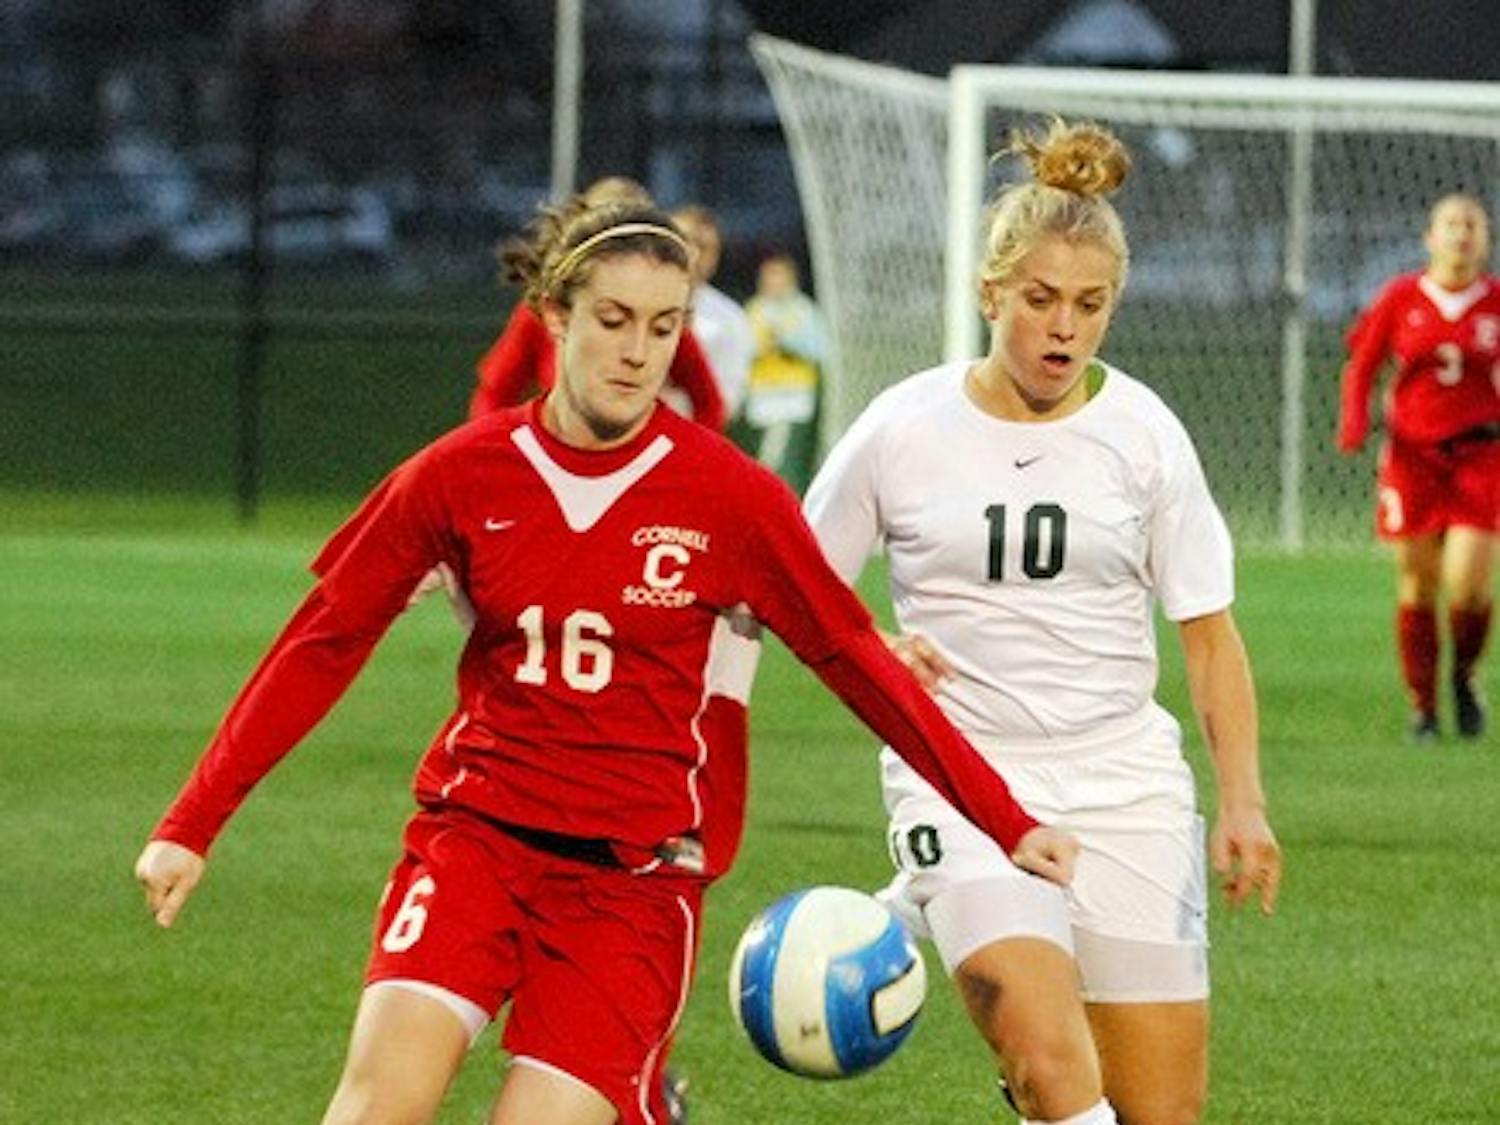 Melisa Krnjaic '10 helped the Big Green hold Cornell to just one goal.